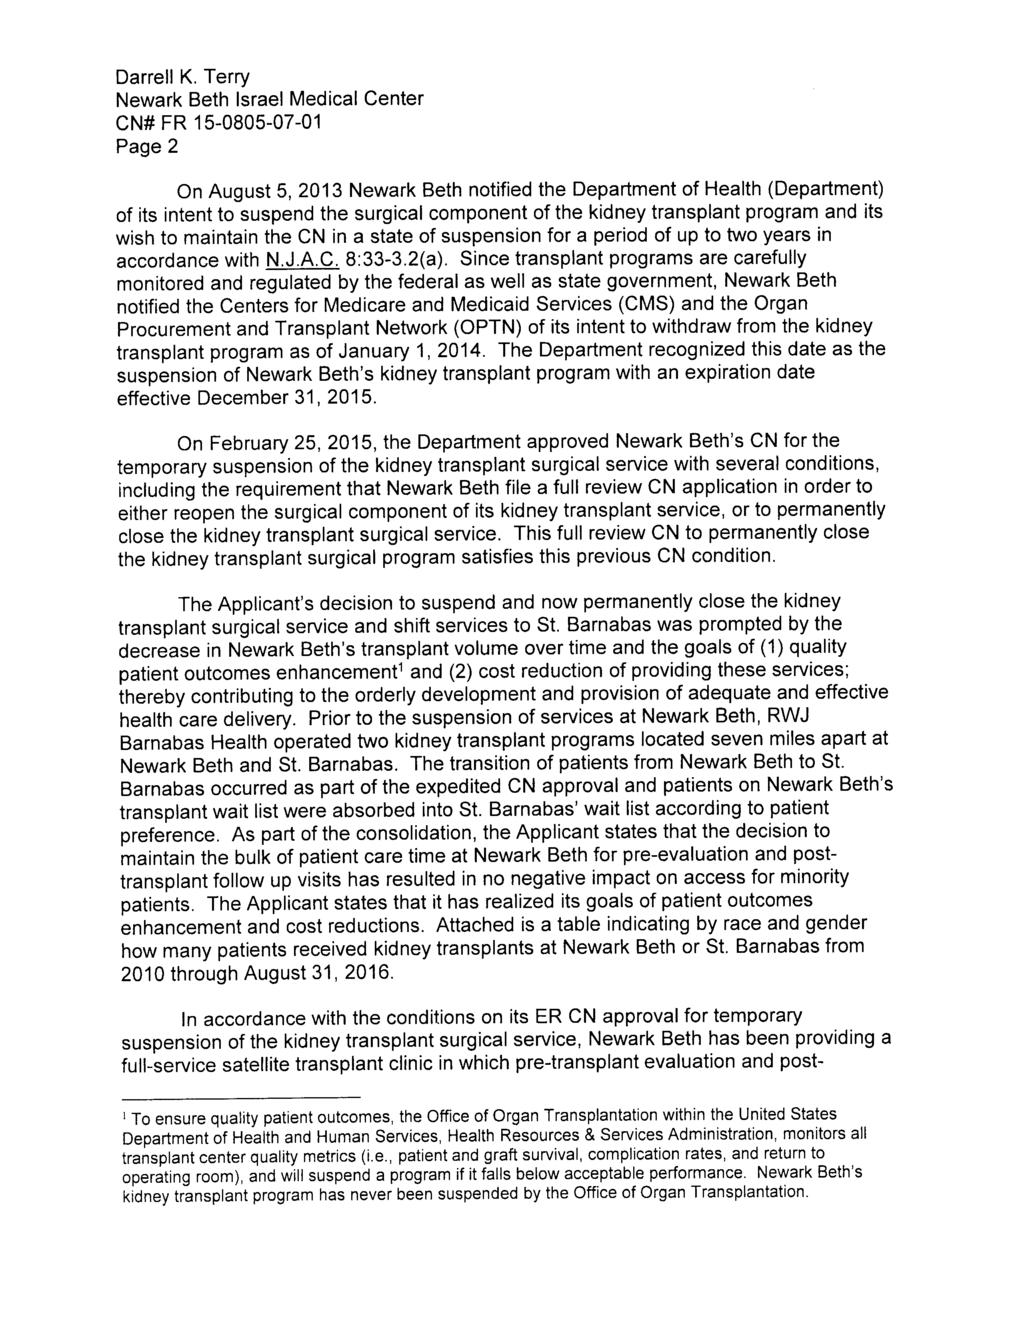 Page 2 On August 5, 2013 Newark Beth notified the Department of Health (Department) of its intent to suspend the surgical component of the kidney transplant program and its wish to maintain the CN in